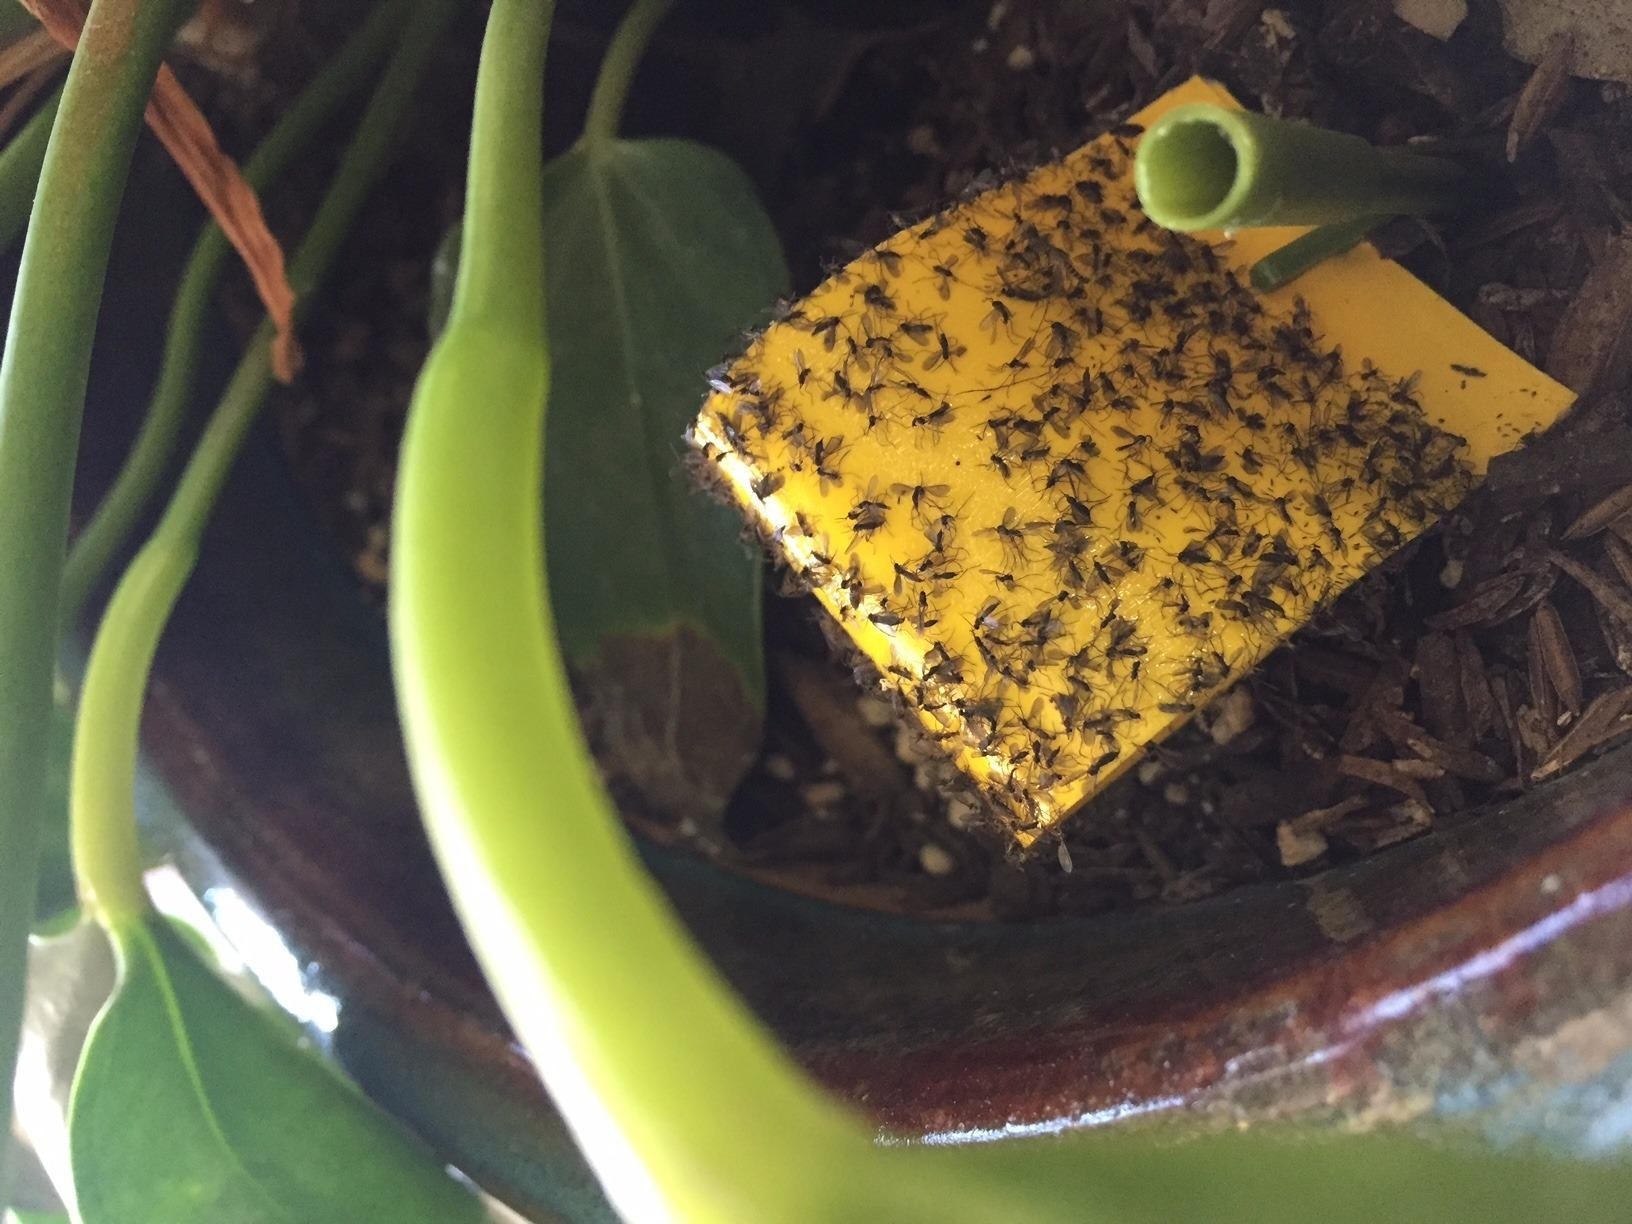 reviewer image of the yellow sticky sheet, in a plant pot, covered with stuck-on gnats